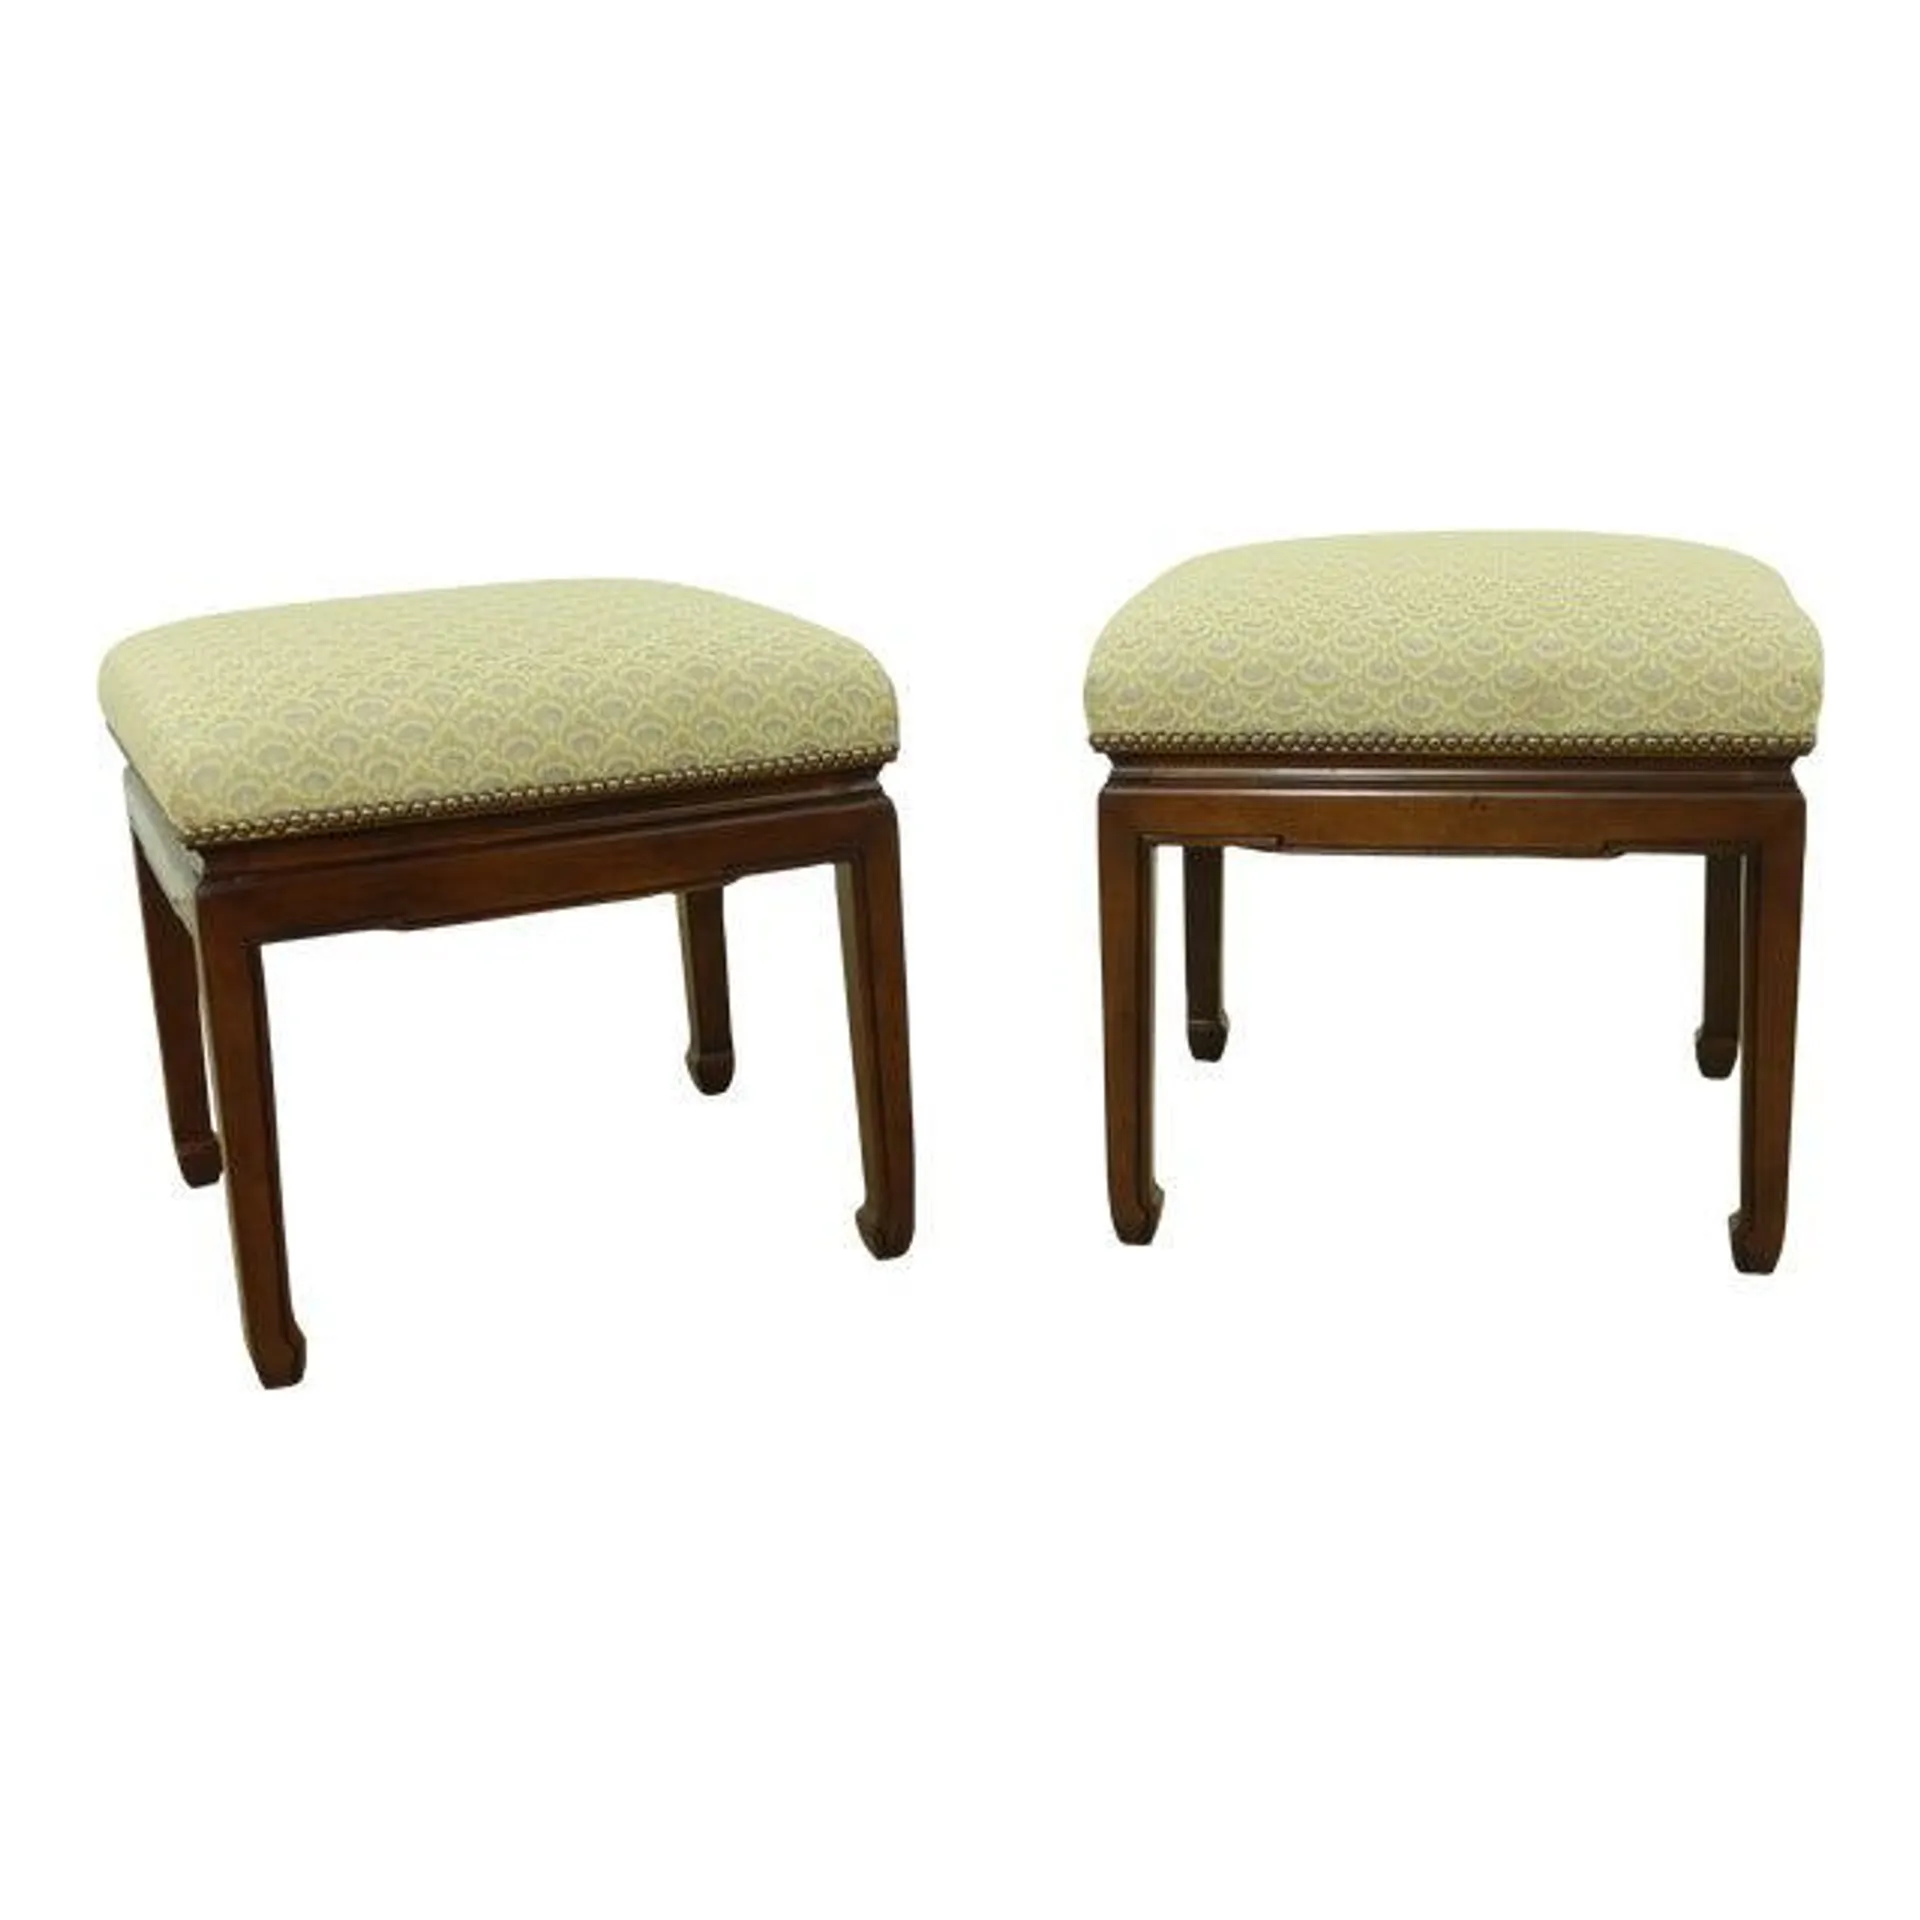 Pair Modern Design Asian Influence Square Stools